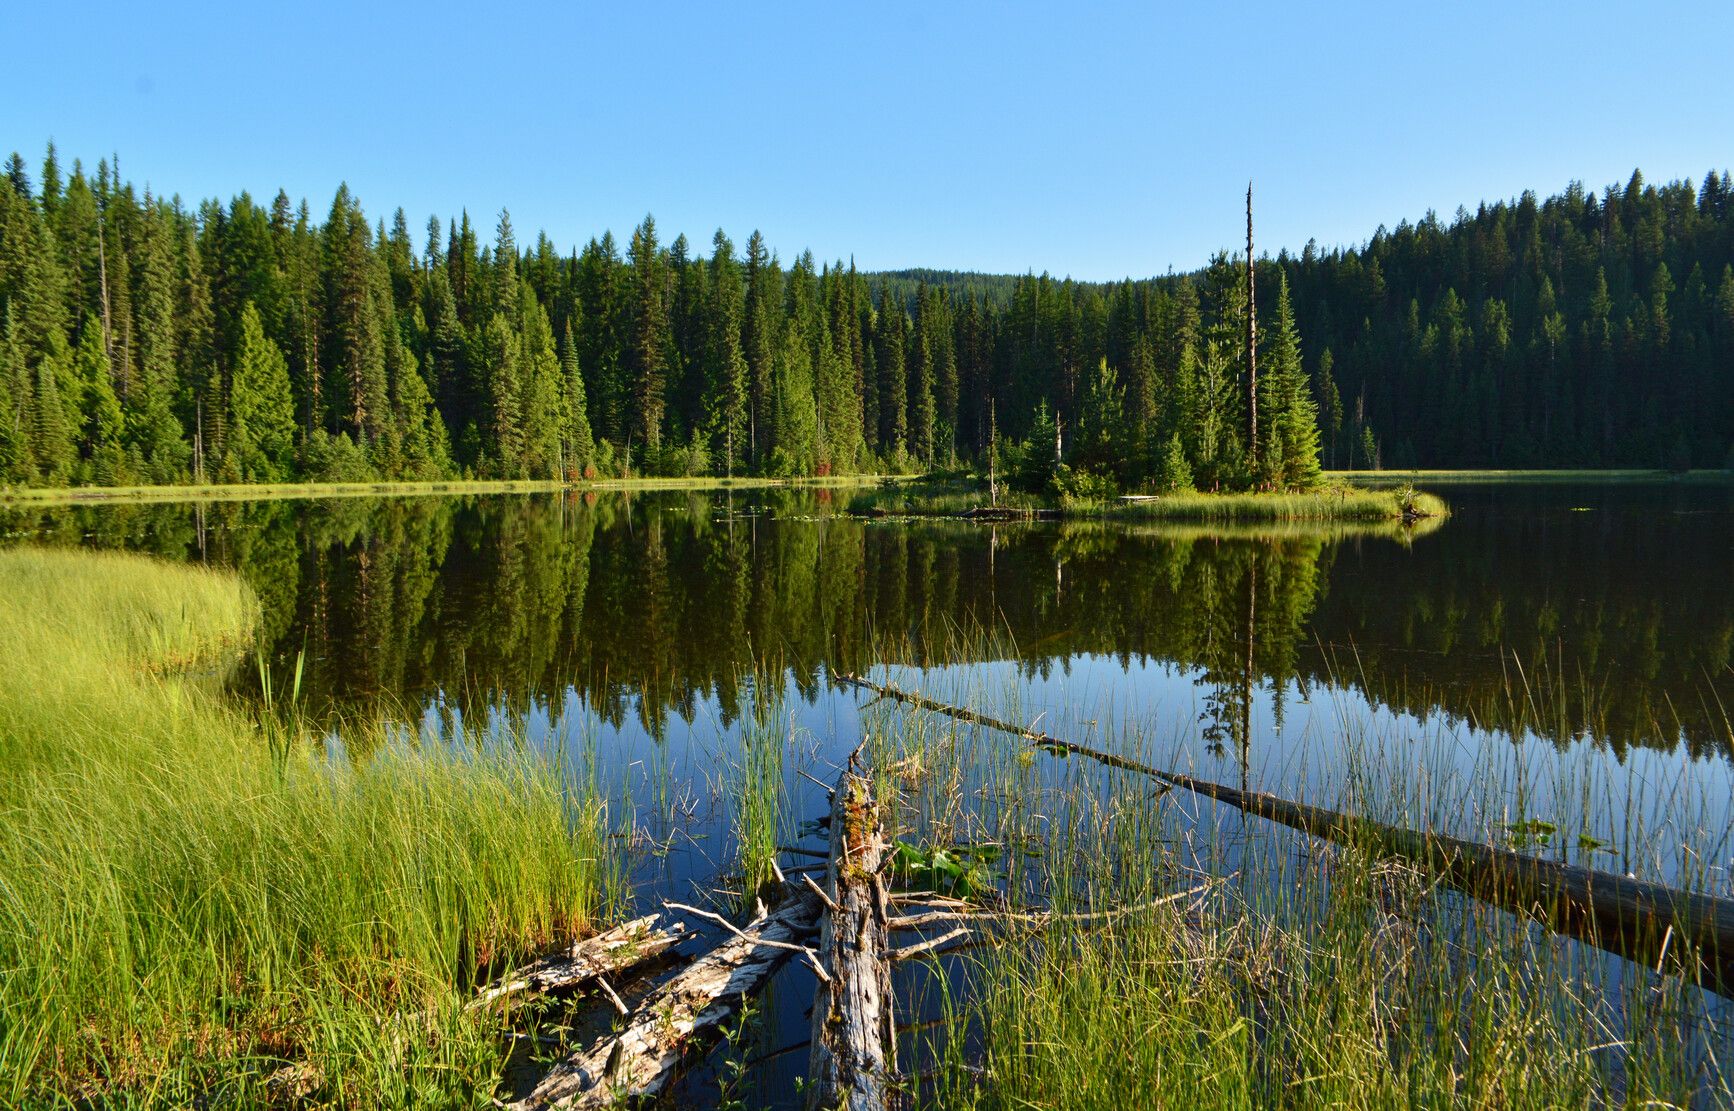 Explore the wetlands and surrounding forest of Second Lake at Champion Lakes Park.